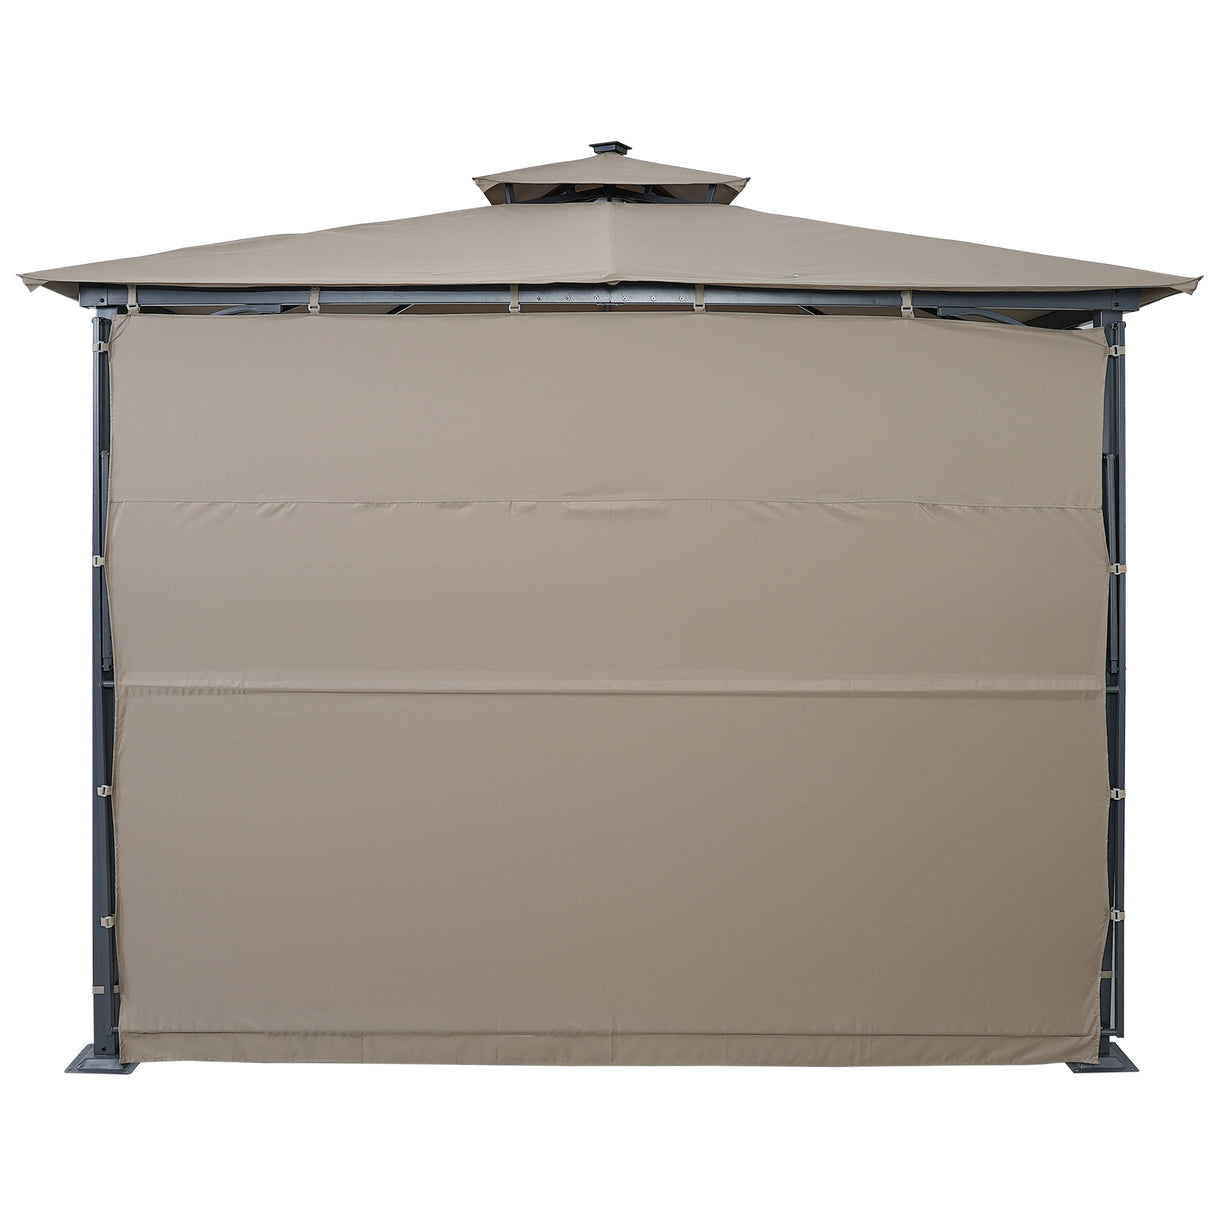 TOPMAX Patio 9.8ft.L x 9.8ft.W Gazebo with Extended Side Shed/Awning and LED Light for Backyard,Poolside, Deck, Brown